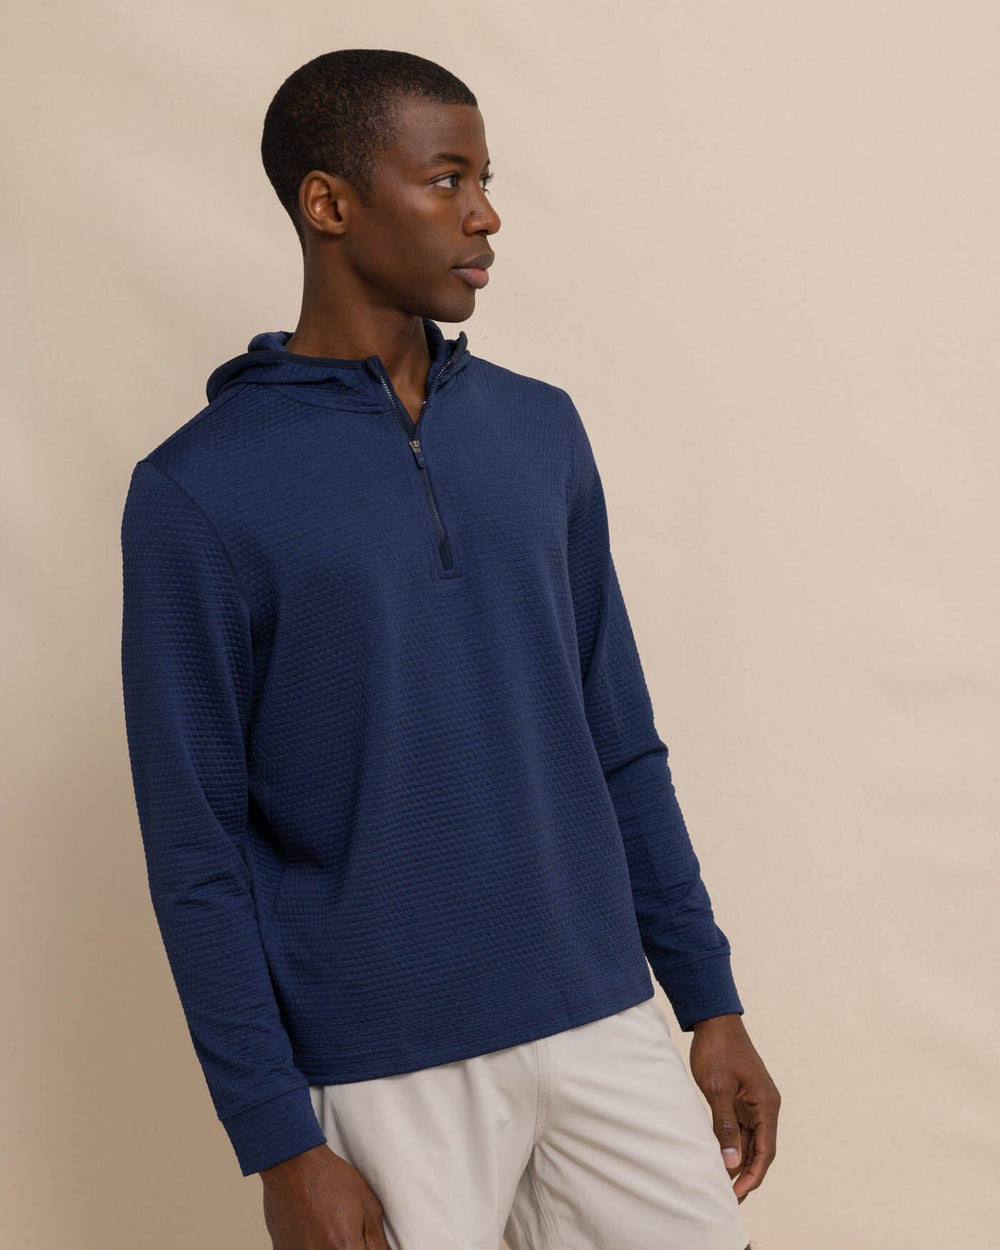 The front view of the Southern Tide Scuttle Heather Performance Quarter Zip Hoodie by Southern Tide - Heather True Navy